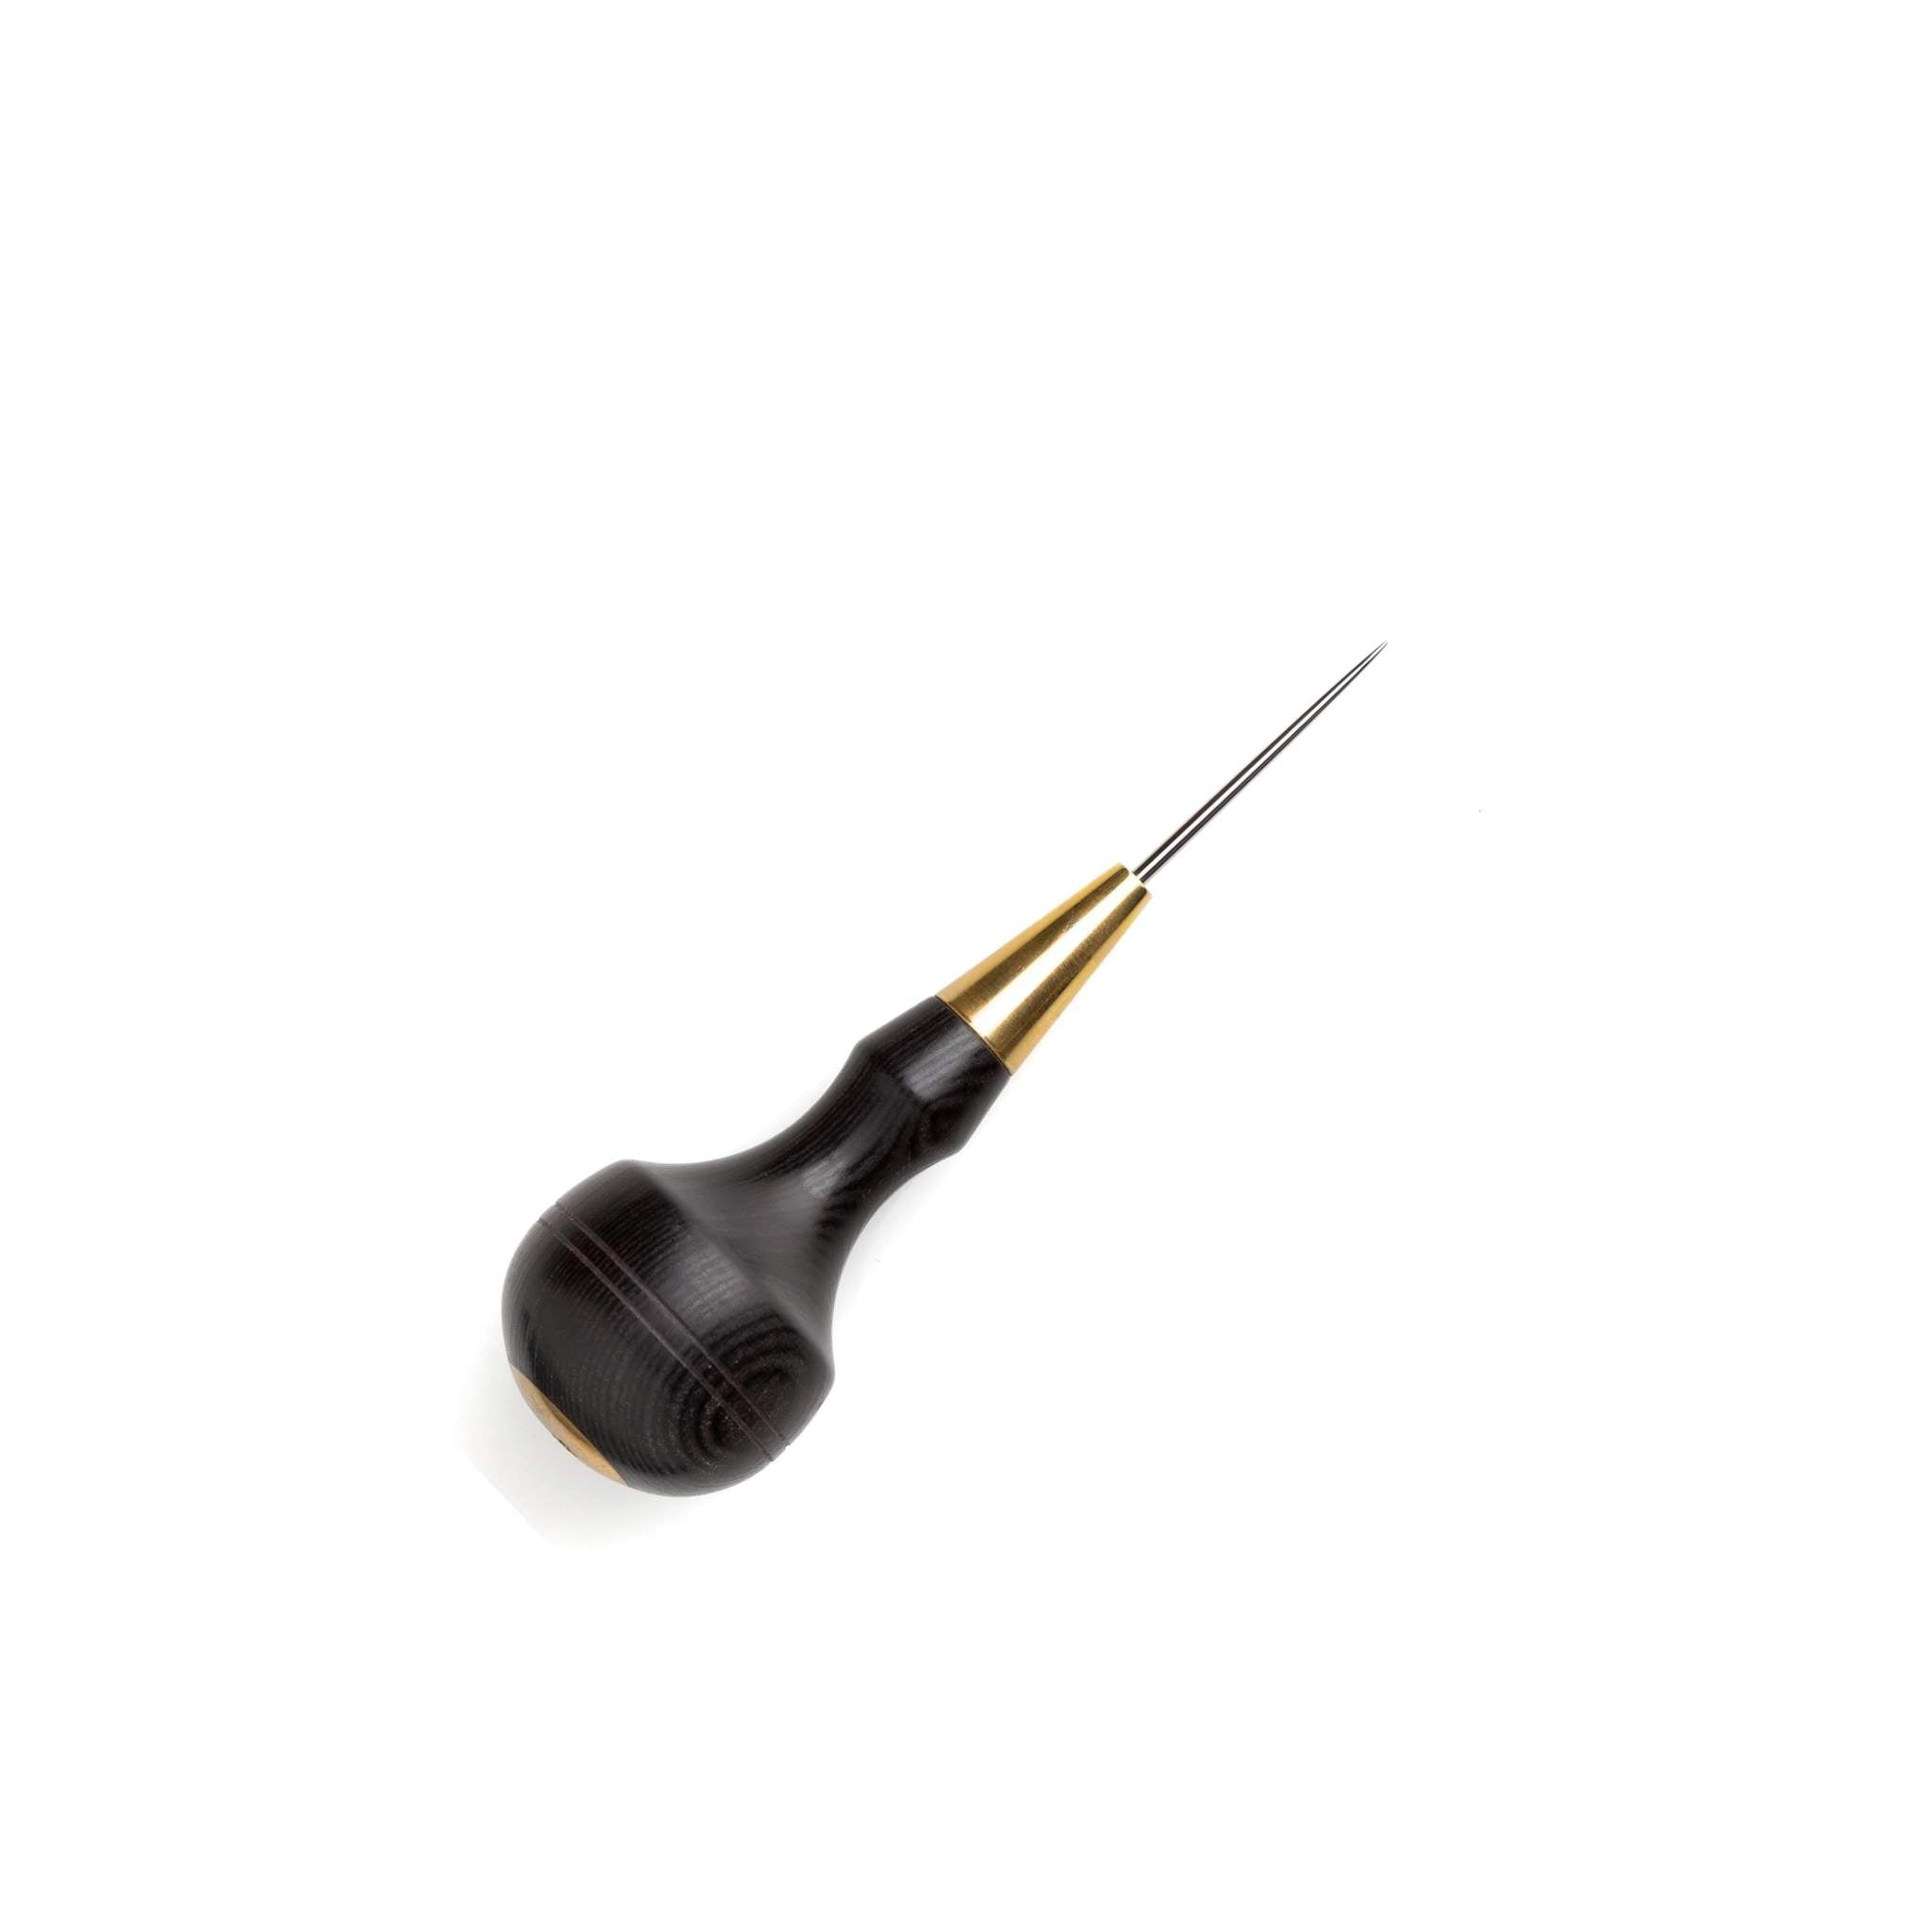 Beautifully made wood and hardened steel leather craft sharp awls in a choice of diamond (stitching) and round tips, ideal for marking up, and piercing all thicknesses of leather.